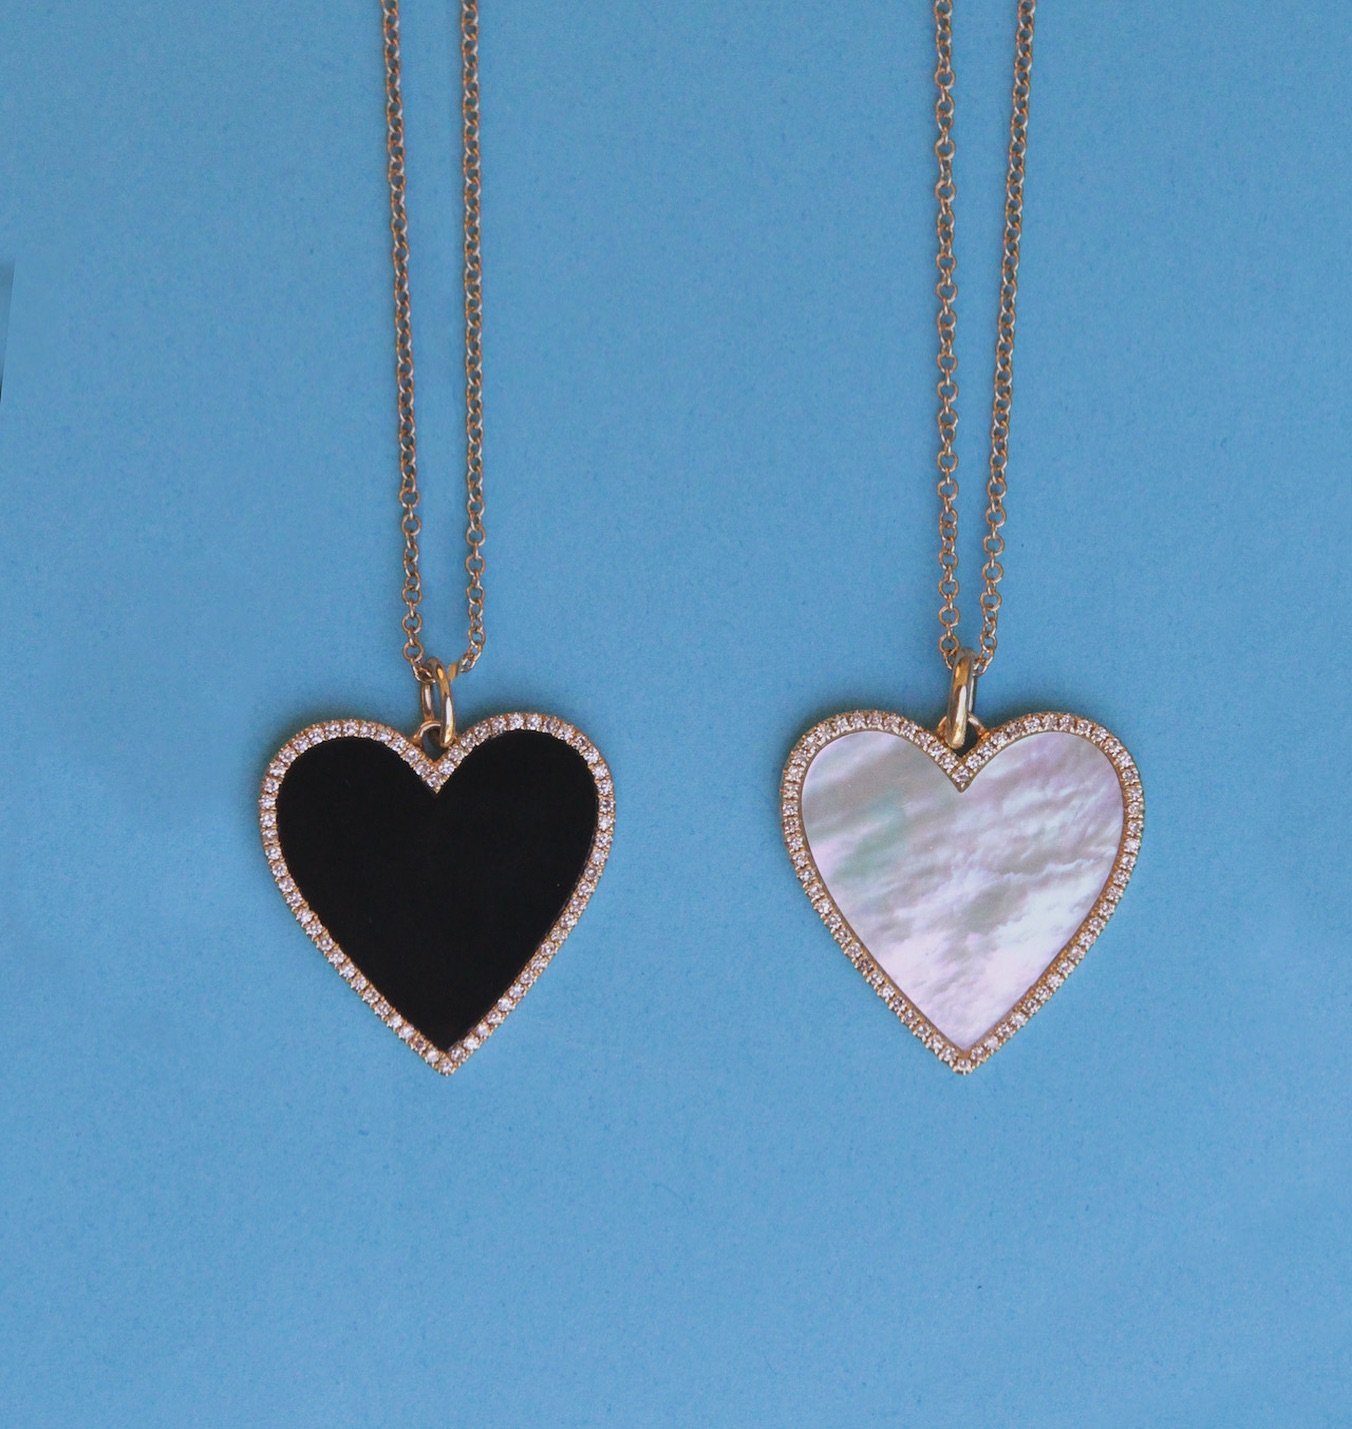 One for you, and one for your BFF! 👯&zwj;♀️ 
💕
#bestfriendnecklace #necklace #heartnecklace #finejewelry #blackheart #Iridescent #heart #heartjewelry #🖤